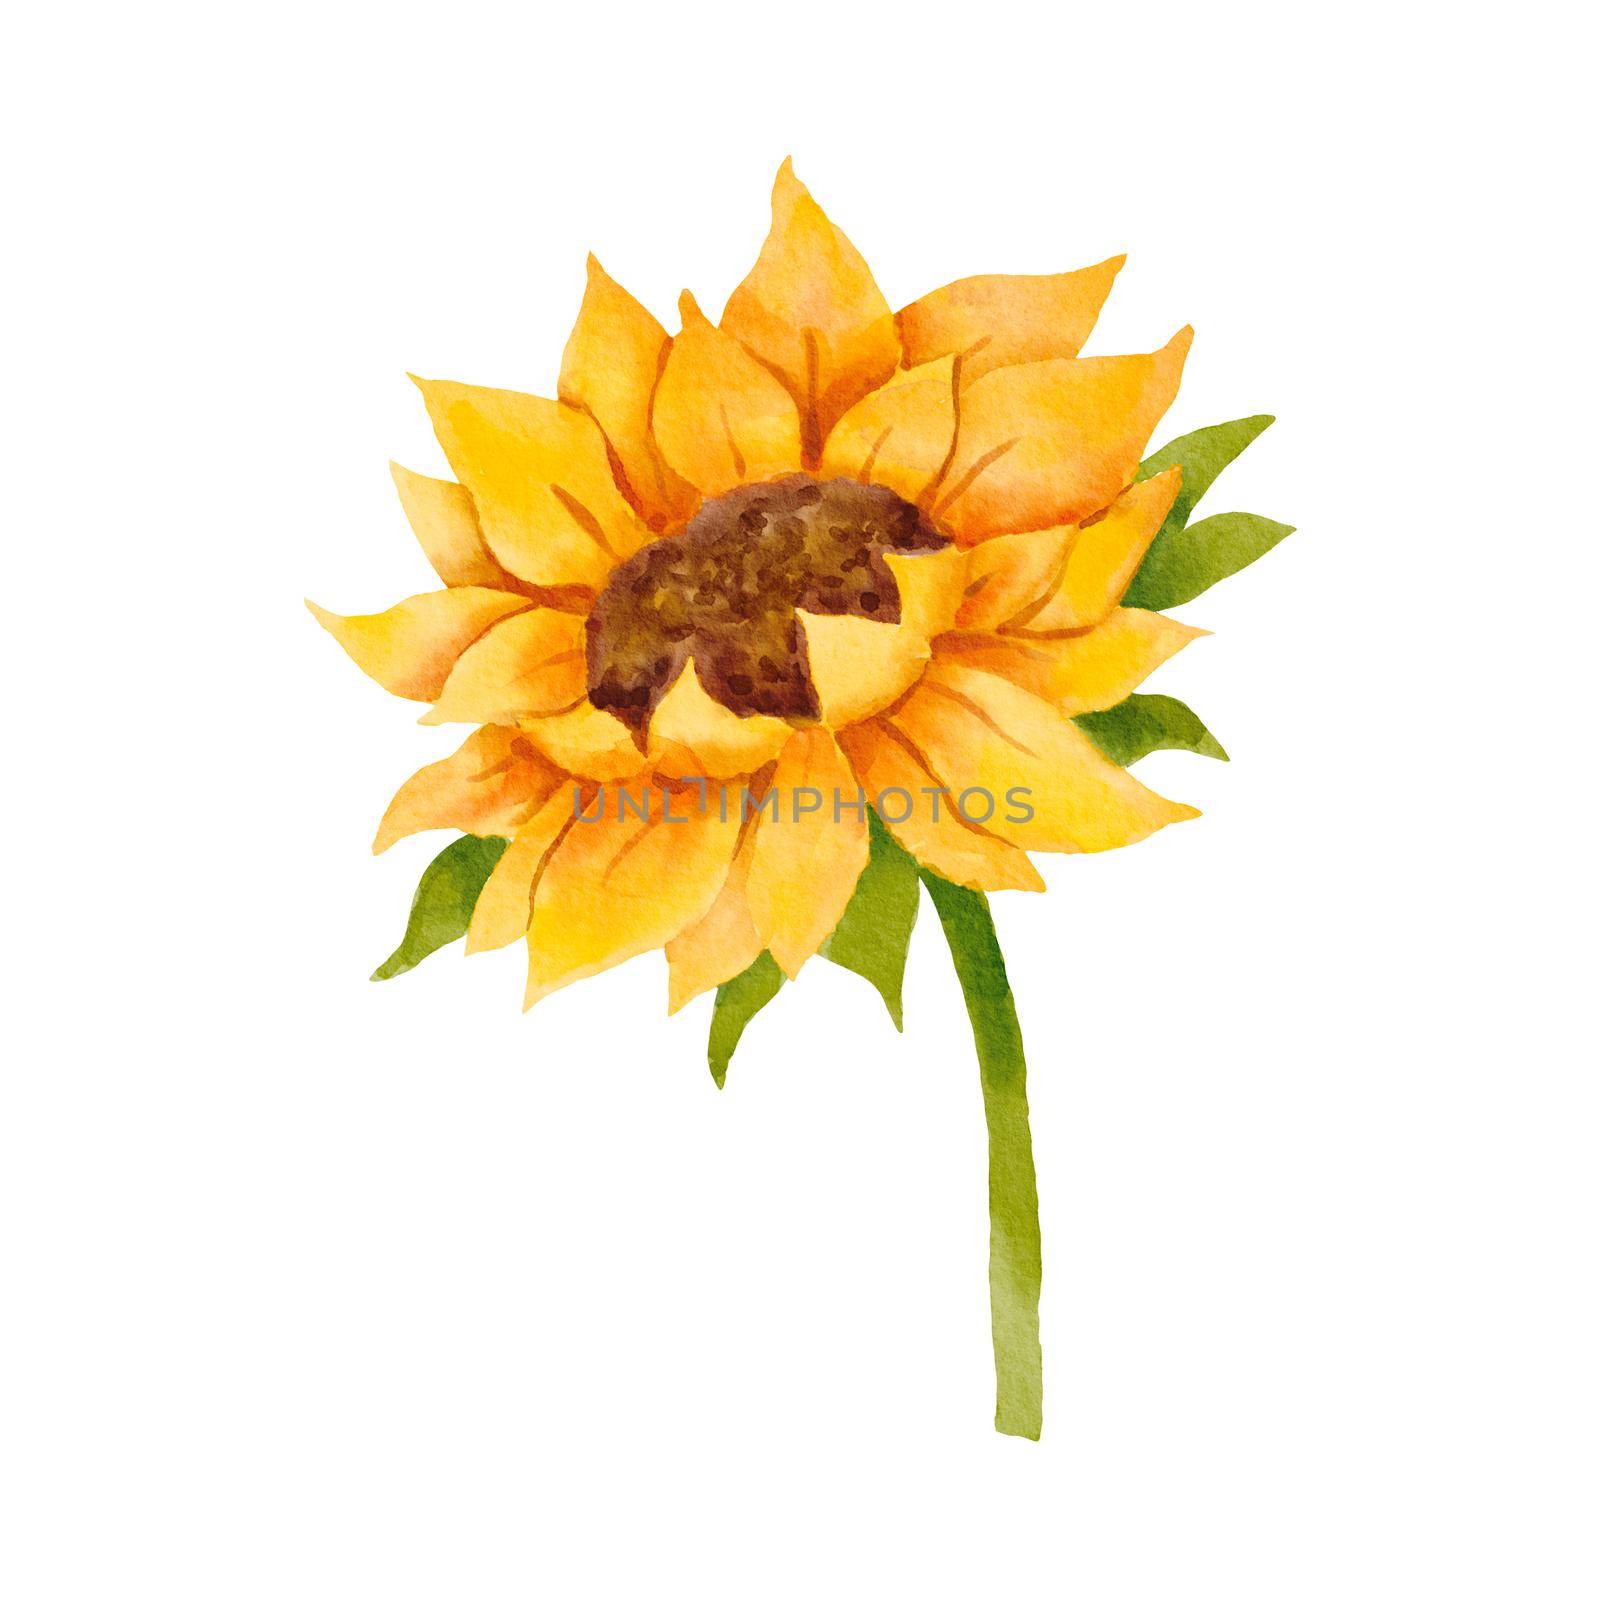 Watercolor sunflower bud. Colorful botanical hand drawn yellow flower illustration isolated on white